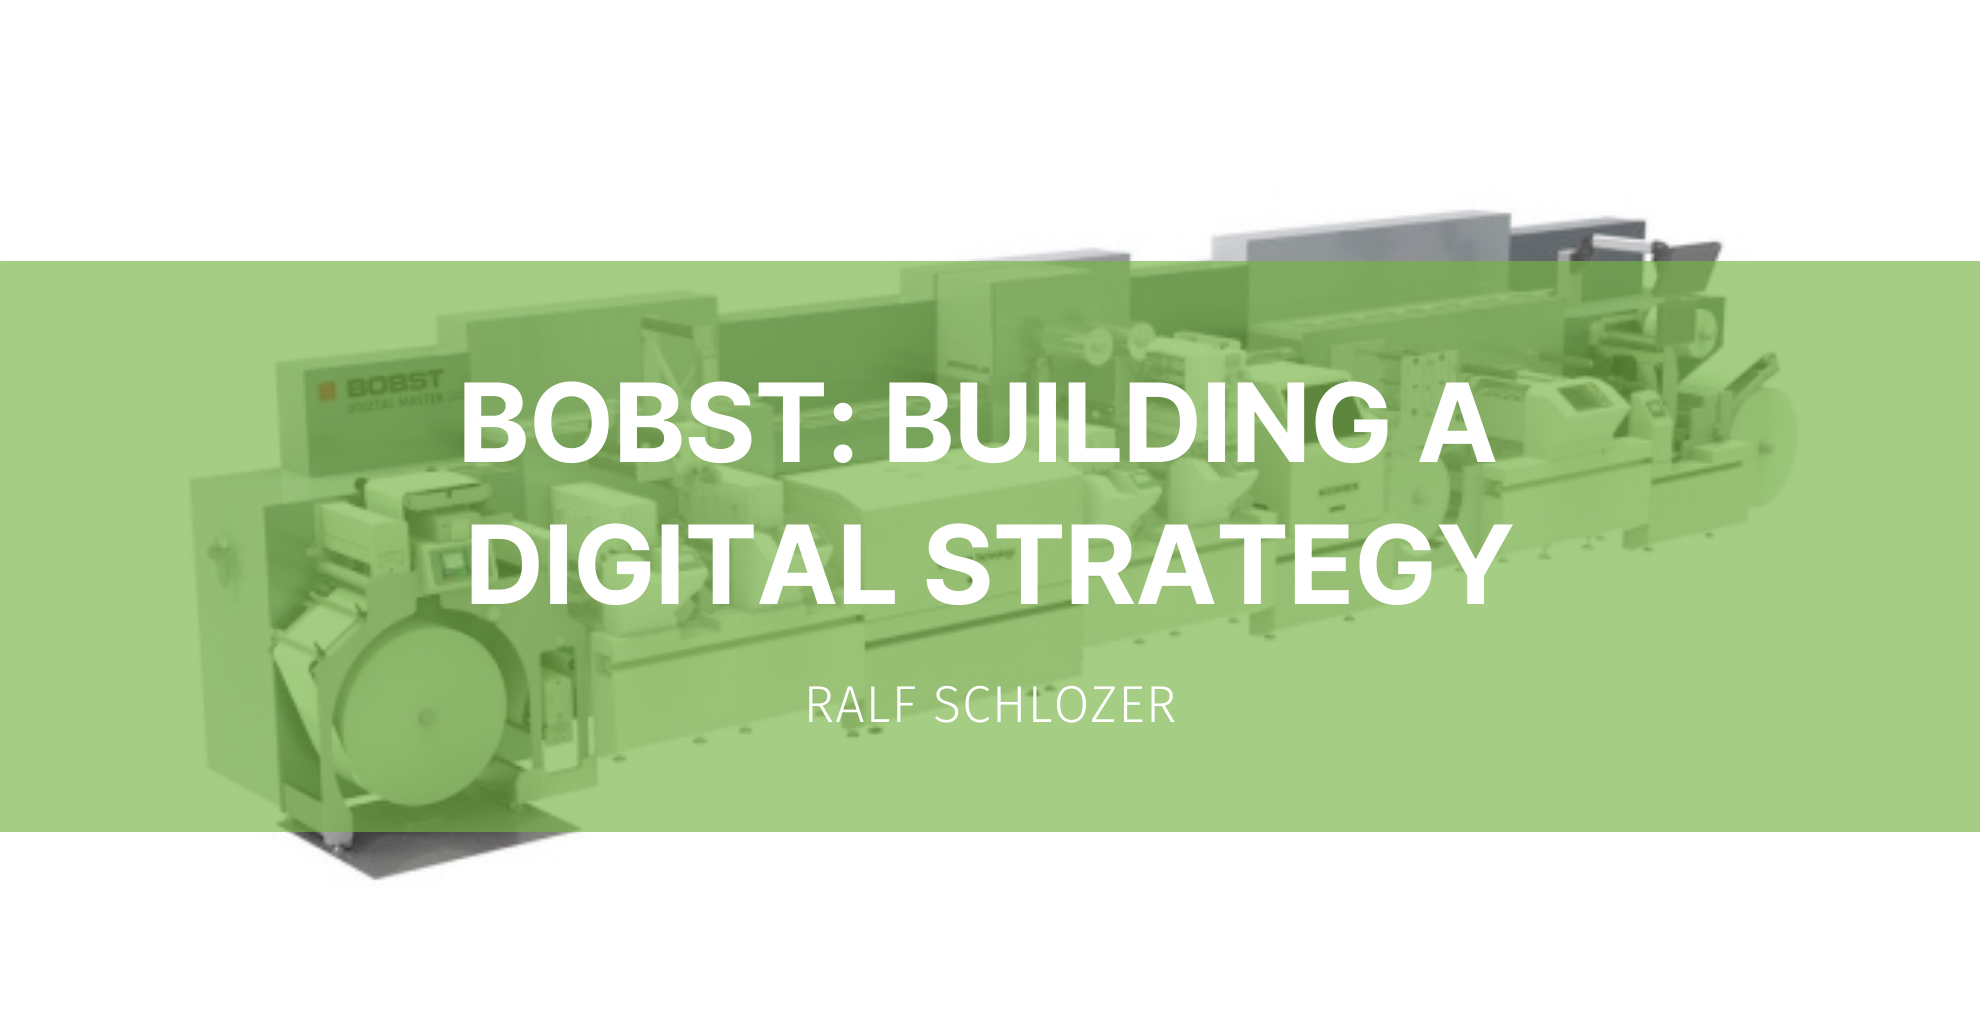 Featured image for “Bobst: Building a Digital Strategy”